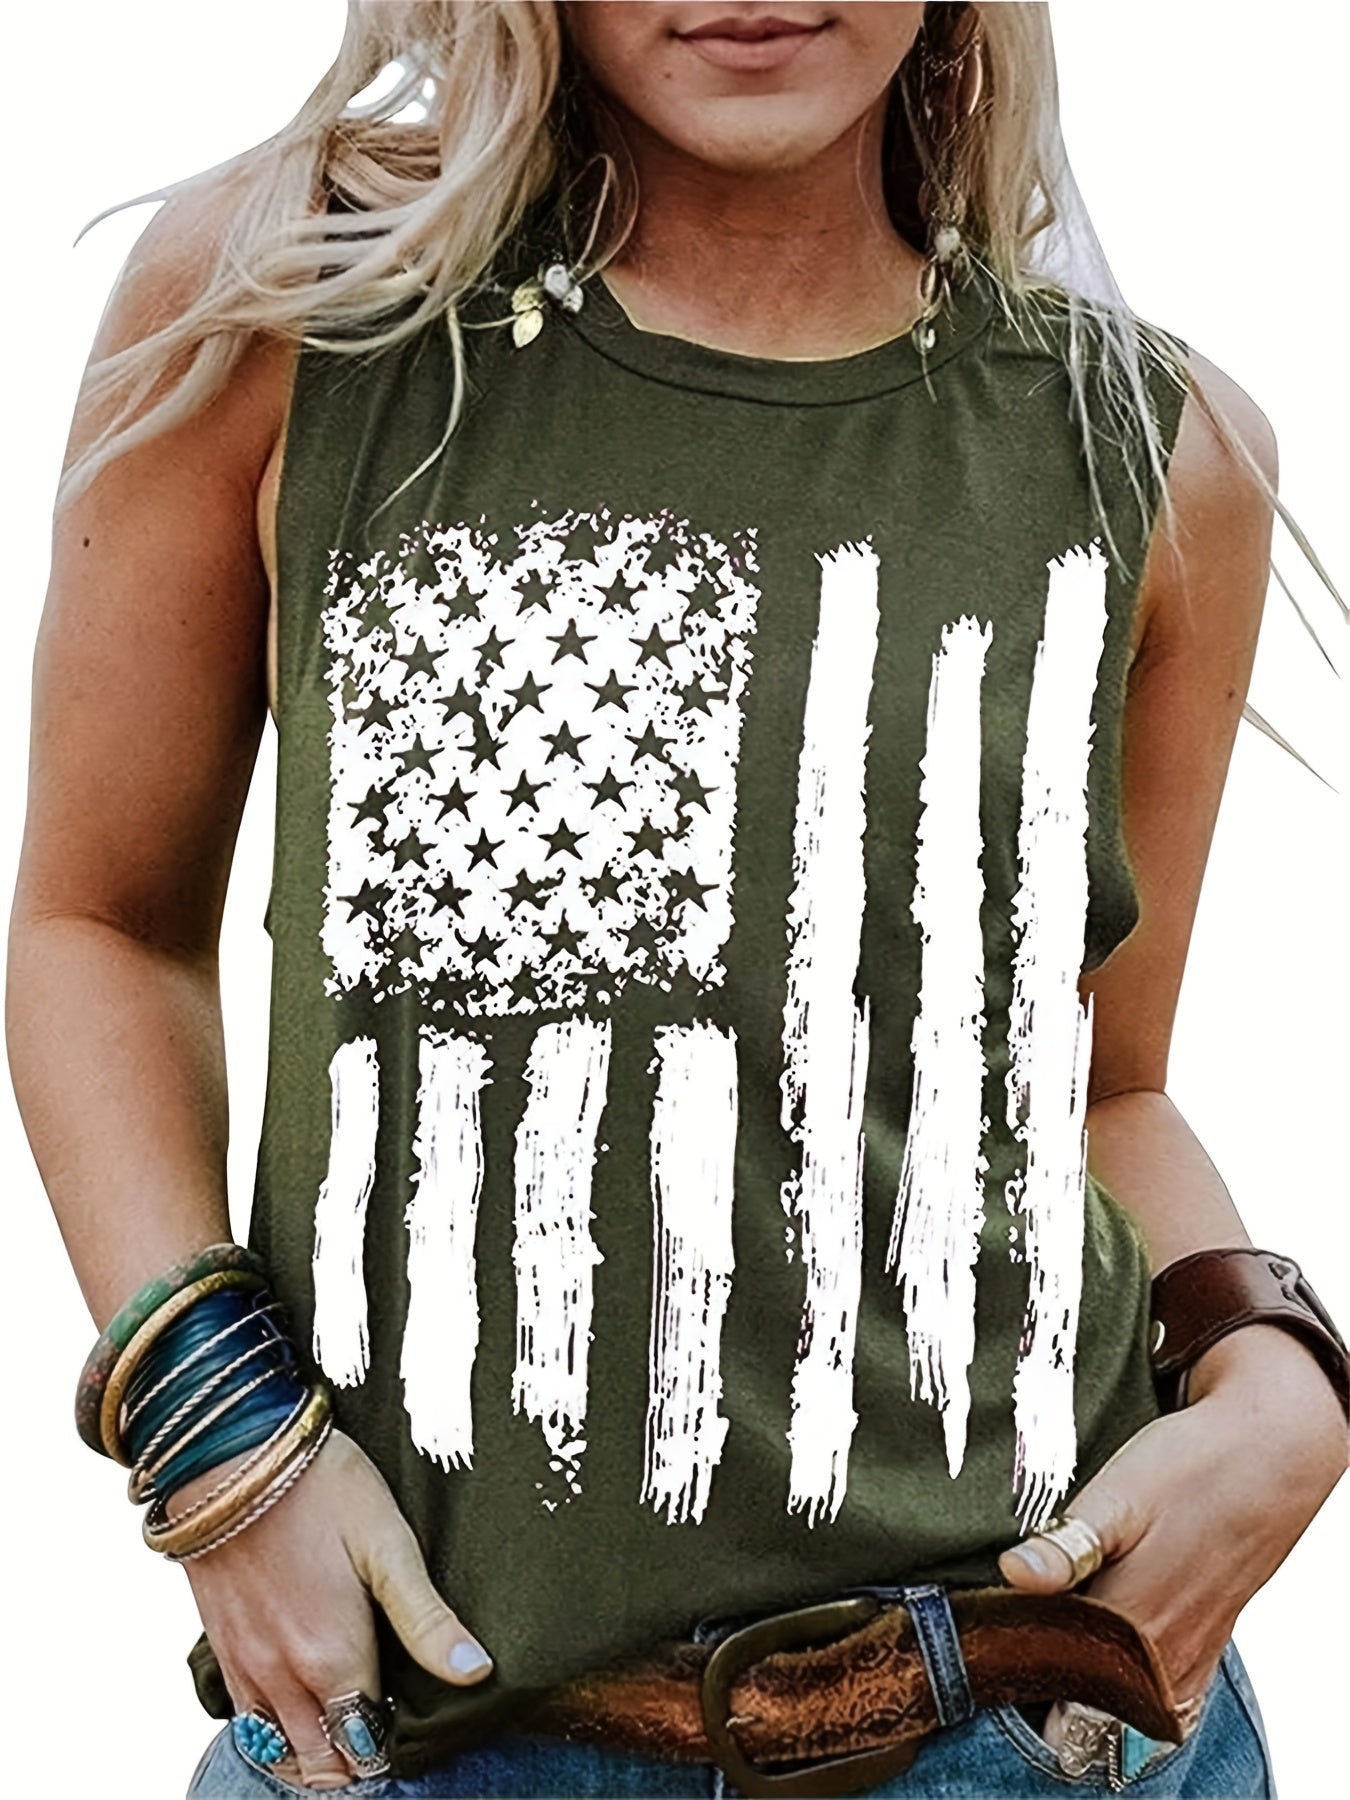 「lovevop」Flag Print Crew Neck Tank Top, Casual Sleeveless Tank Top For Summer, Women's Clothing